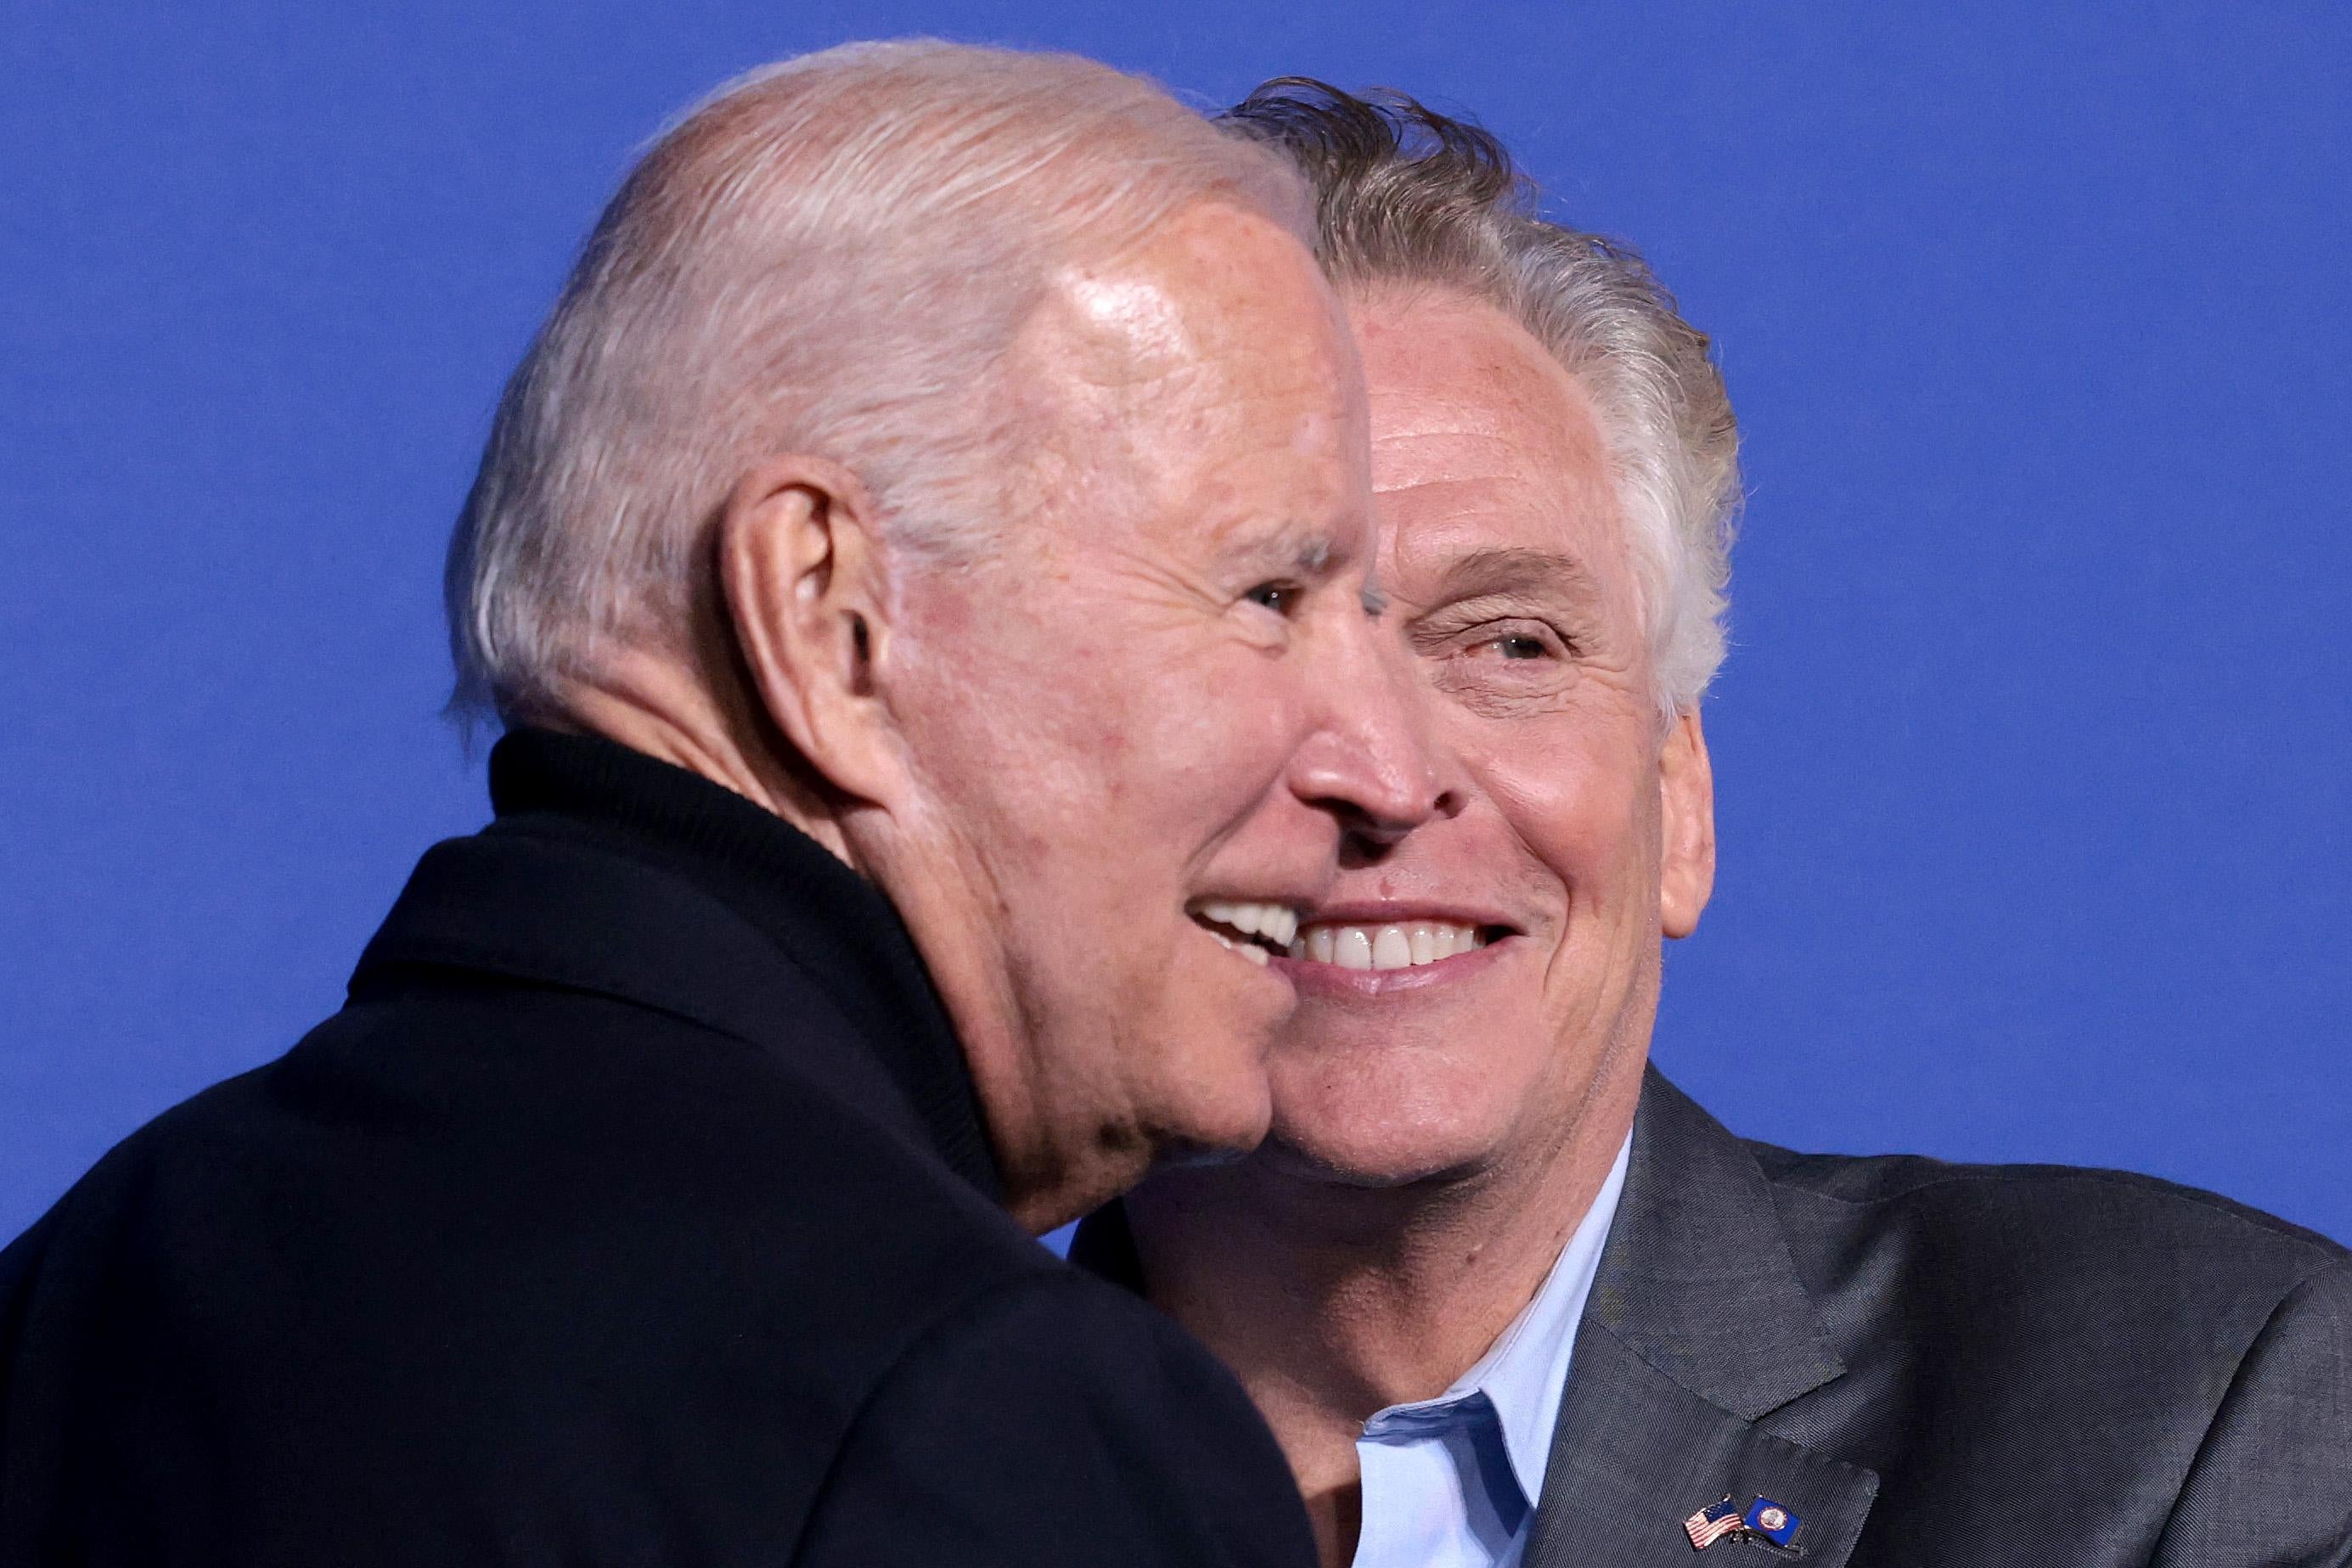 Biden and McAuliffe stand smiling with their faces cheek to cheek